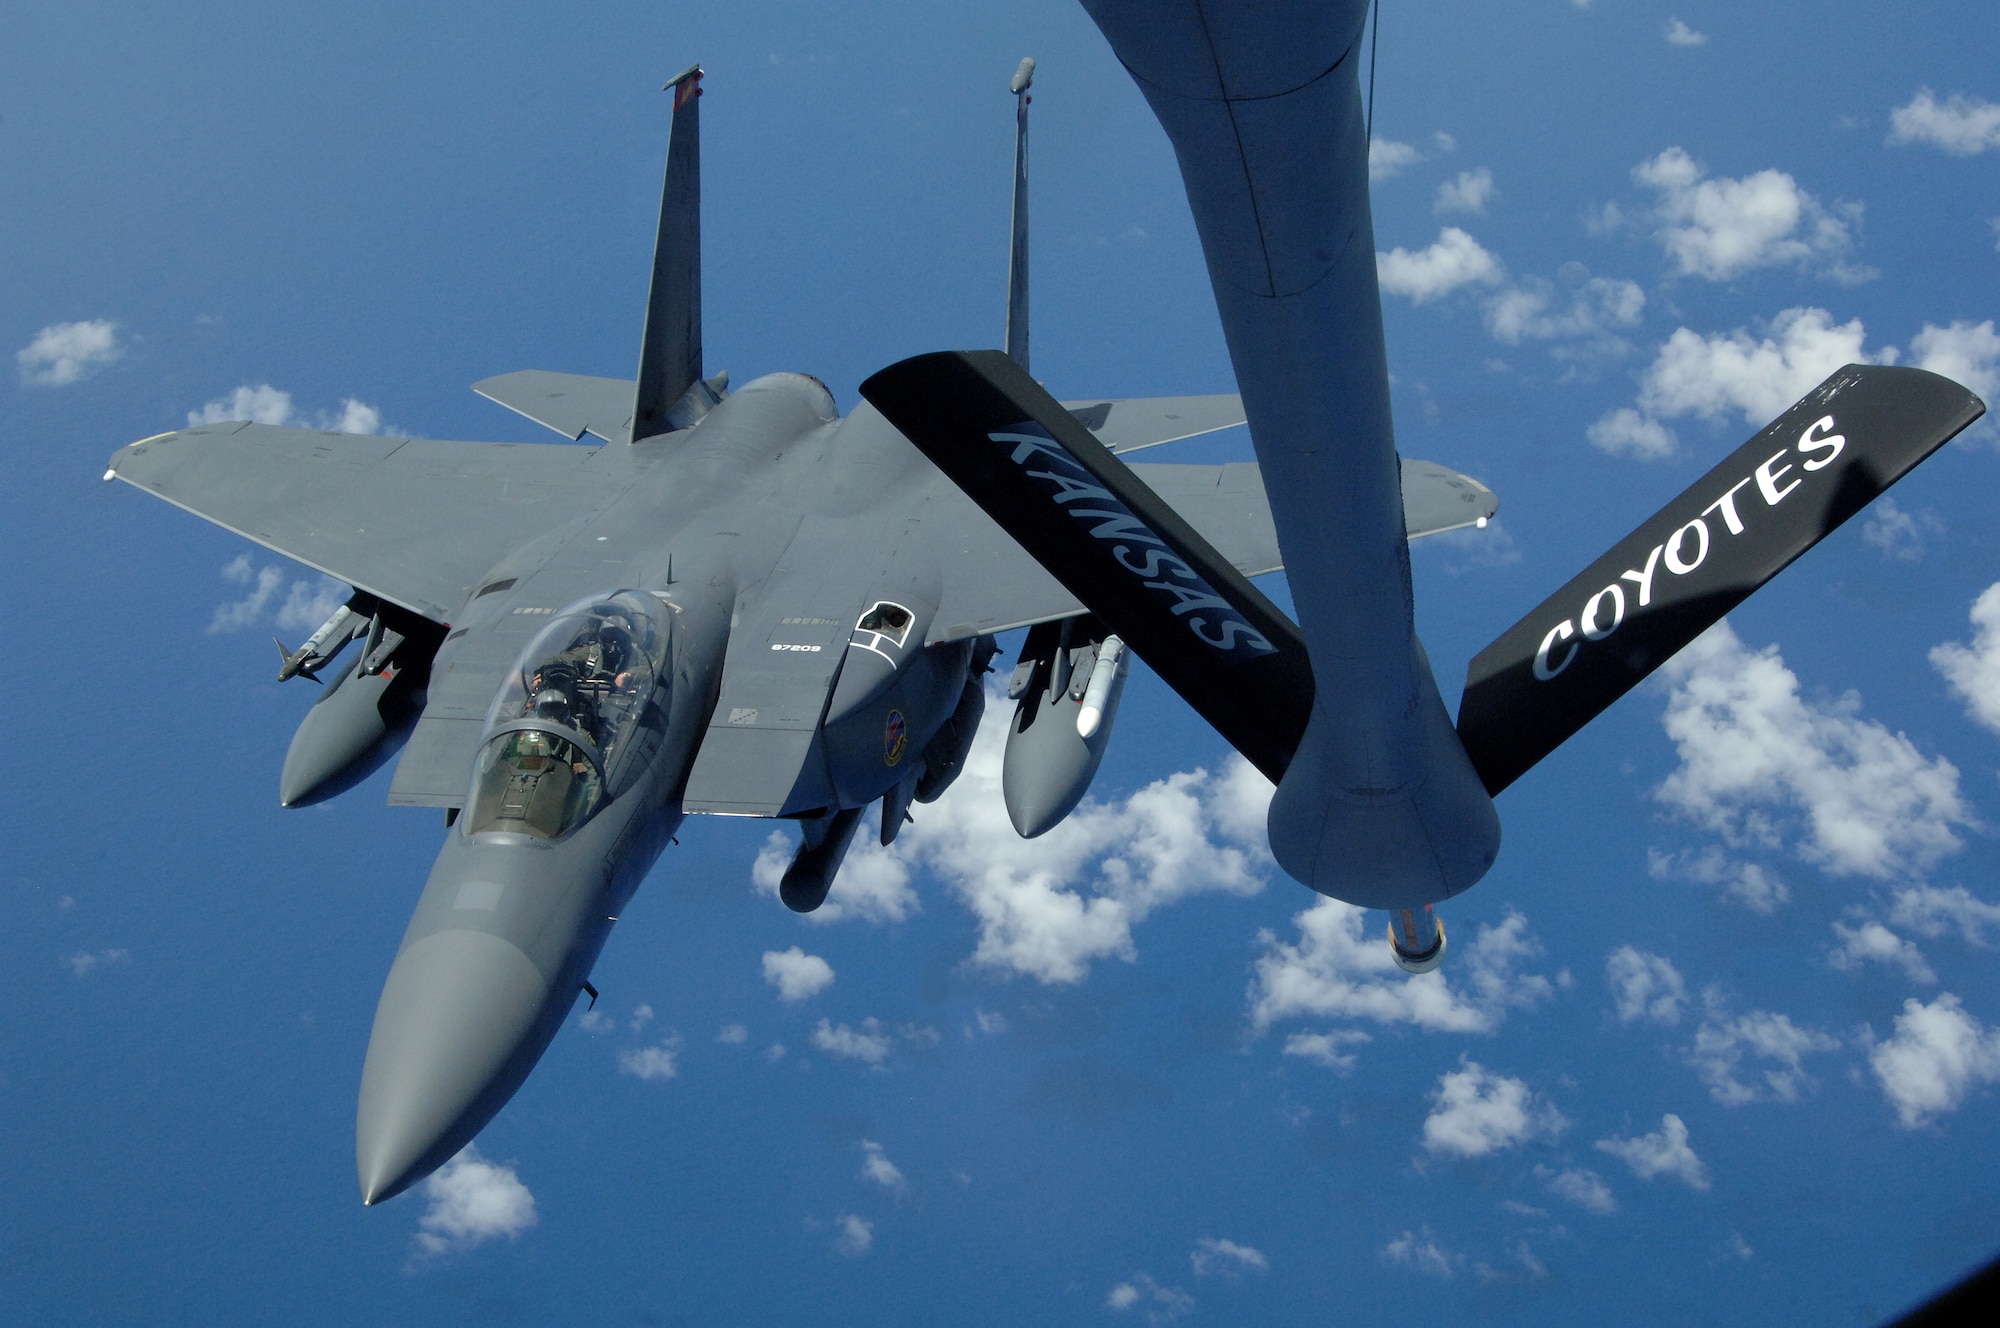 A U.S. Air Force F-15E Strike Eagle from Mountain Home Air Force Base, Idaho, approaches the boom for refueling high above the pacific by a KC-135 Stratotanker from the 117th Air Refueling Squadron, Forbes Field Air National Guard Base, Topeka Kan. Both took off from Andersen Air Force Base, Guam on June 12. (U.S. Air Force photo by Airman 1st Class Courtney Witt)